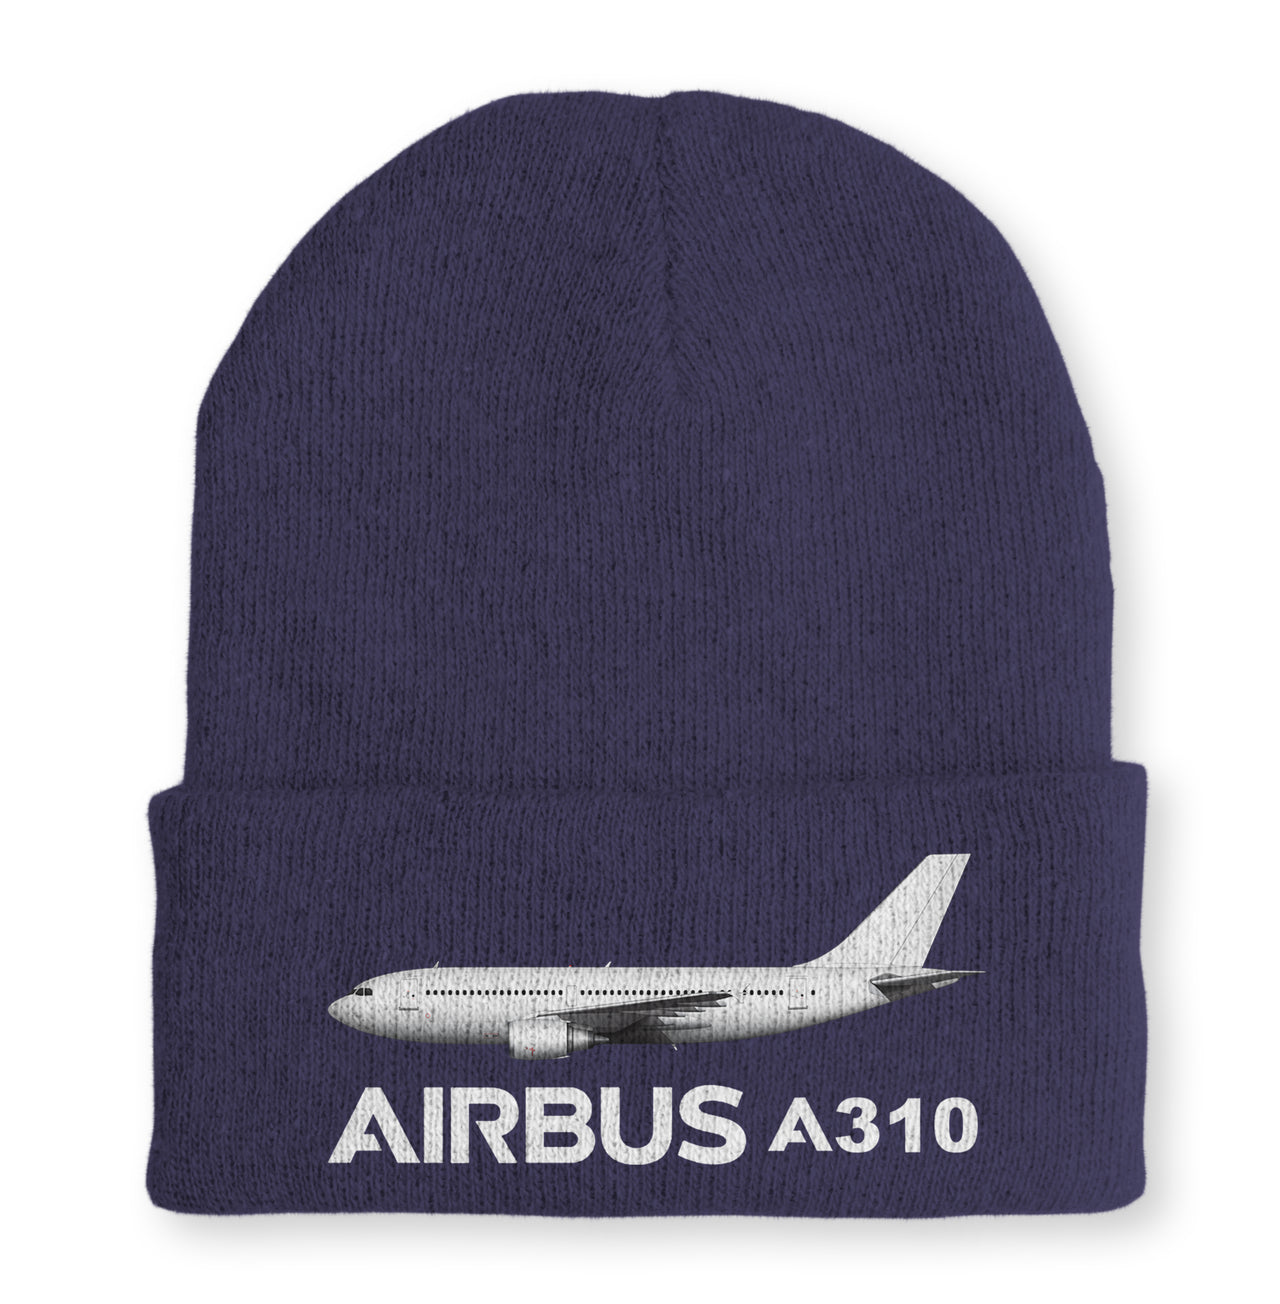 The Airbus A310 Embroidered Beanies